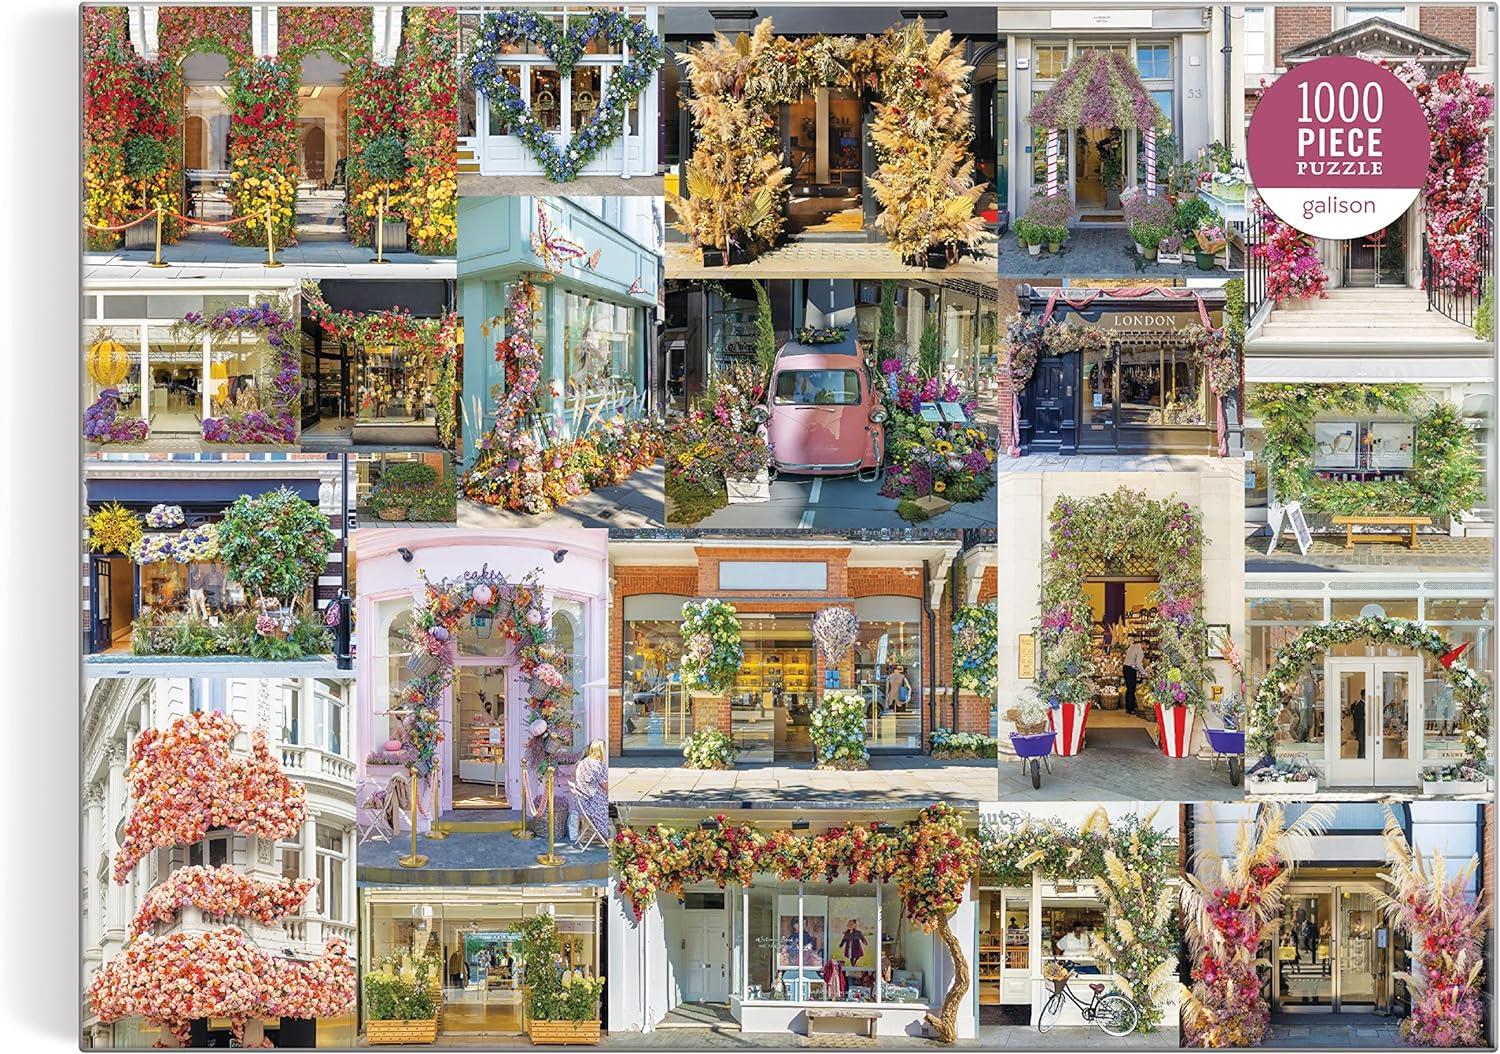 Galison London in Bloom Jigsaw Puzzle (1000 Pieces)